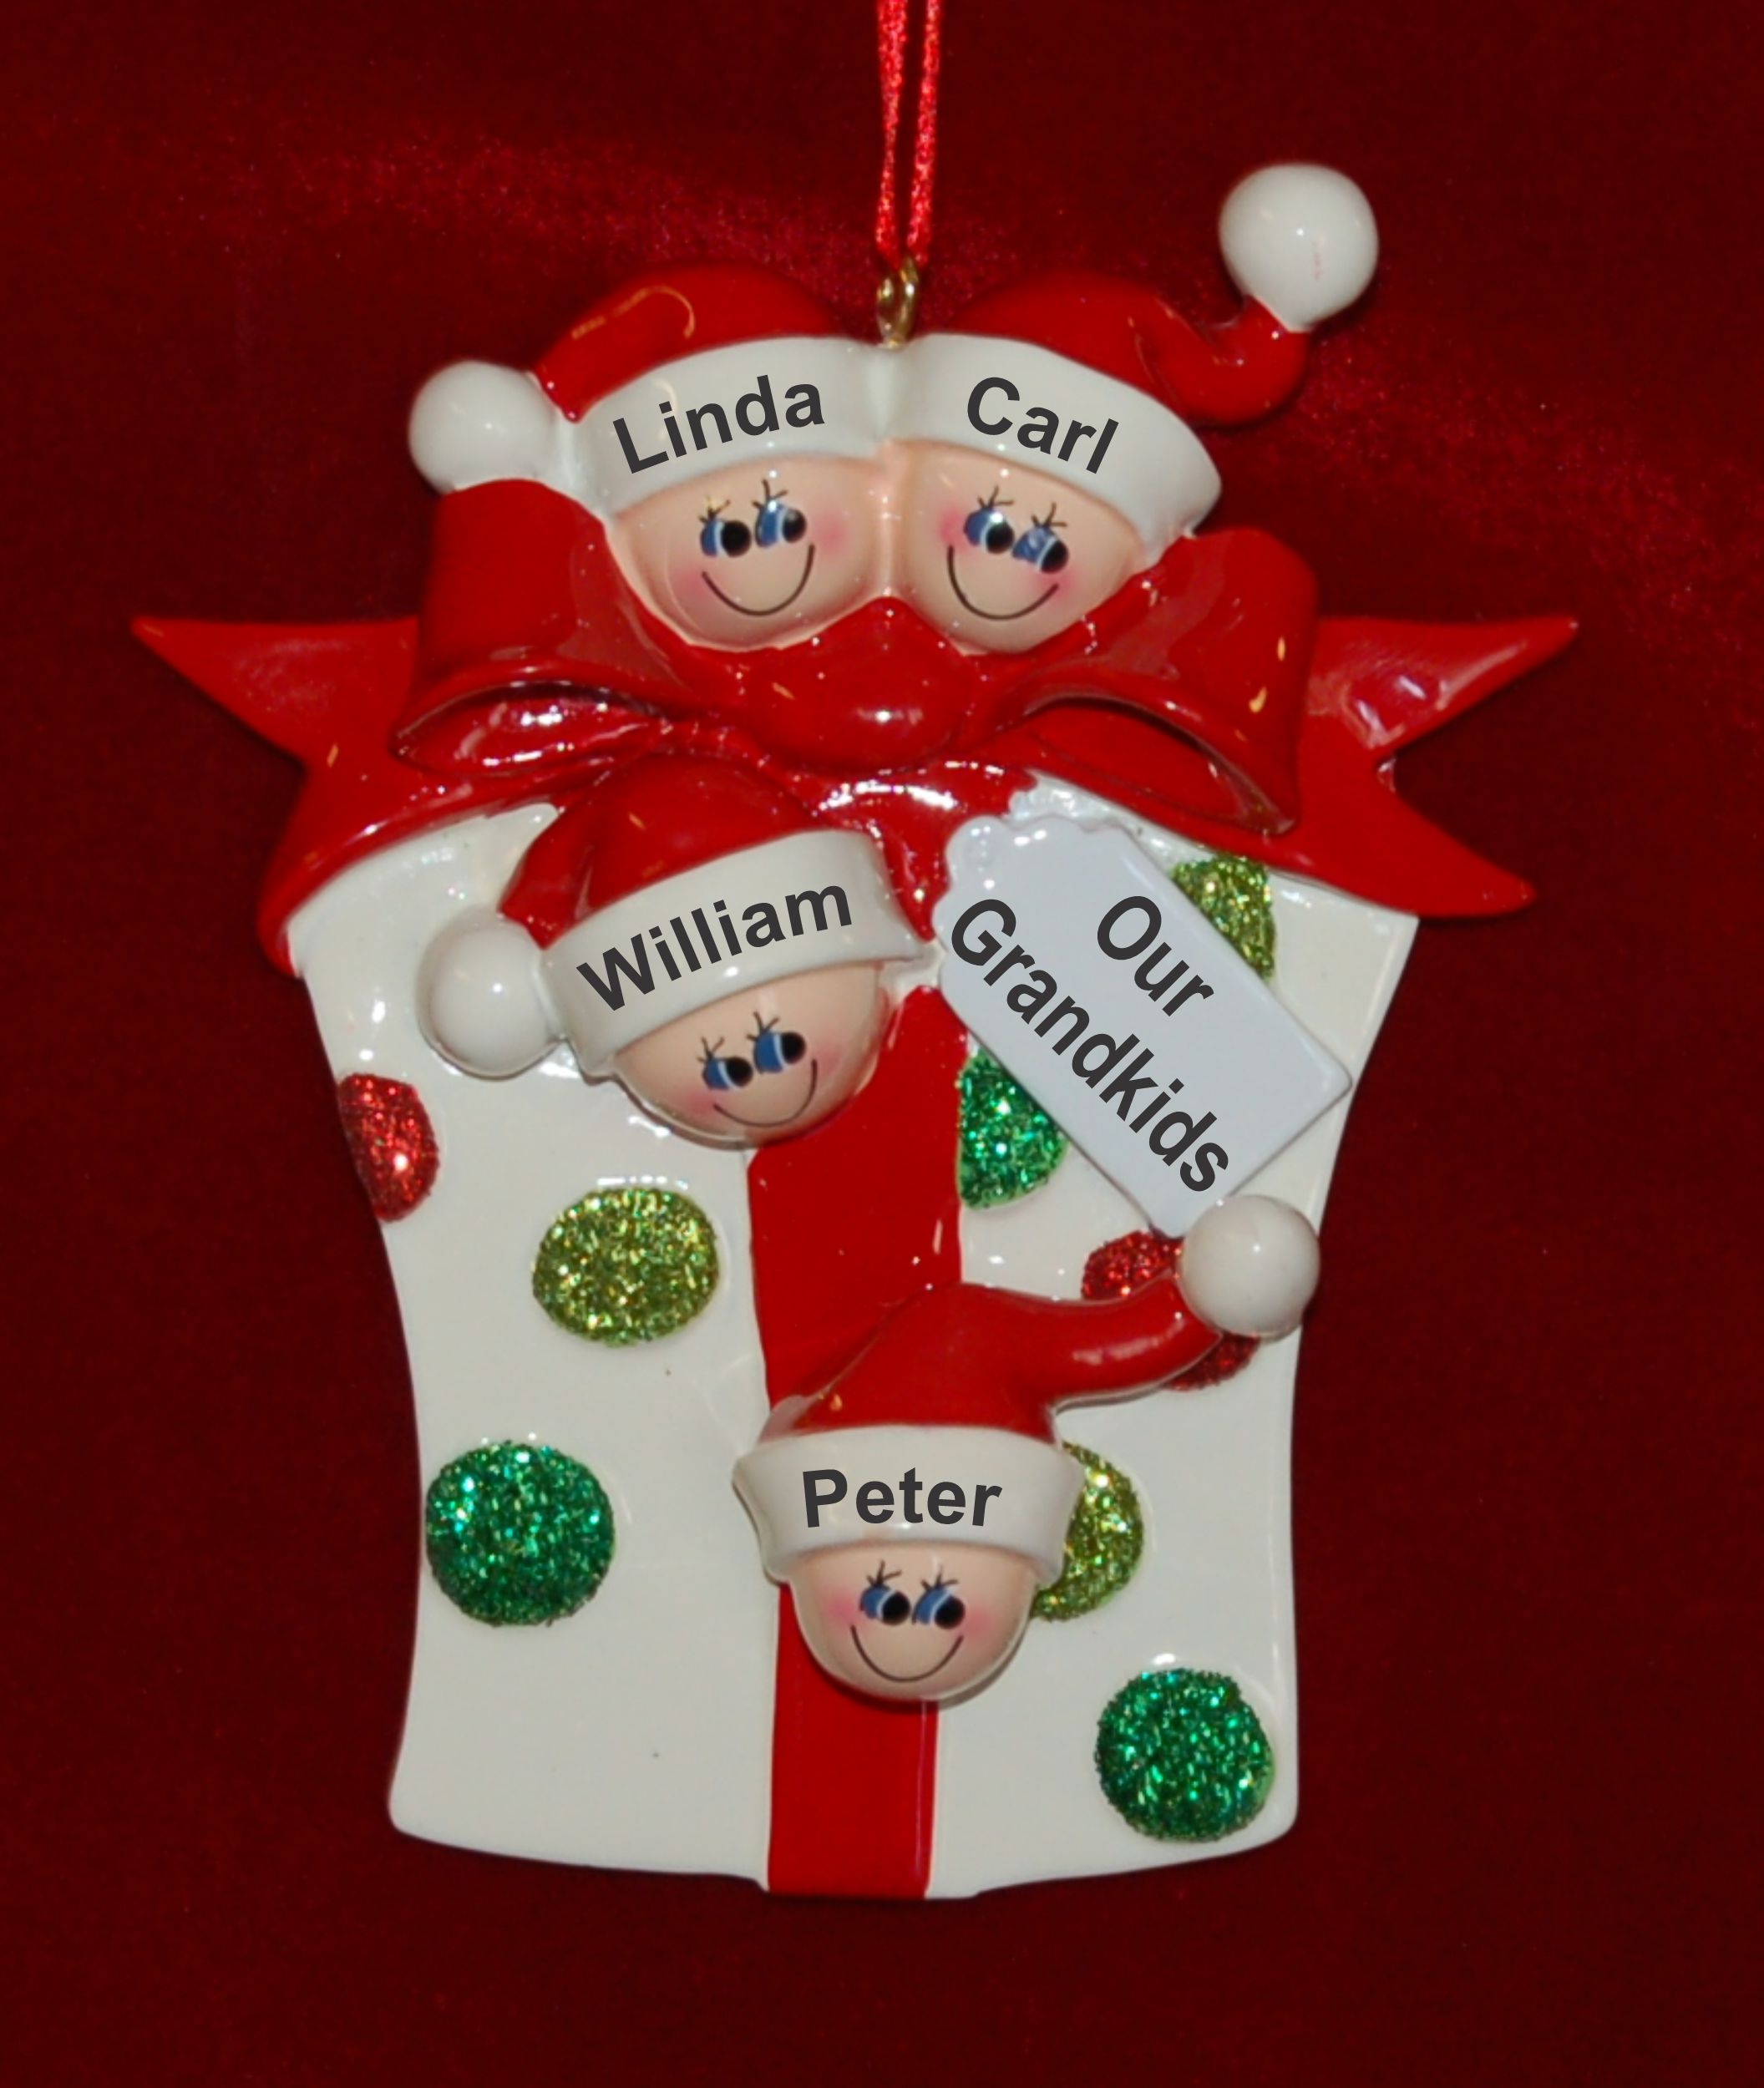 Personalized Grandparents Christmas Ornament Xmas Gift 4 Grandkids by Russell Rhodes